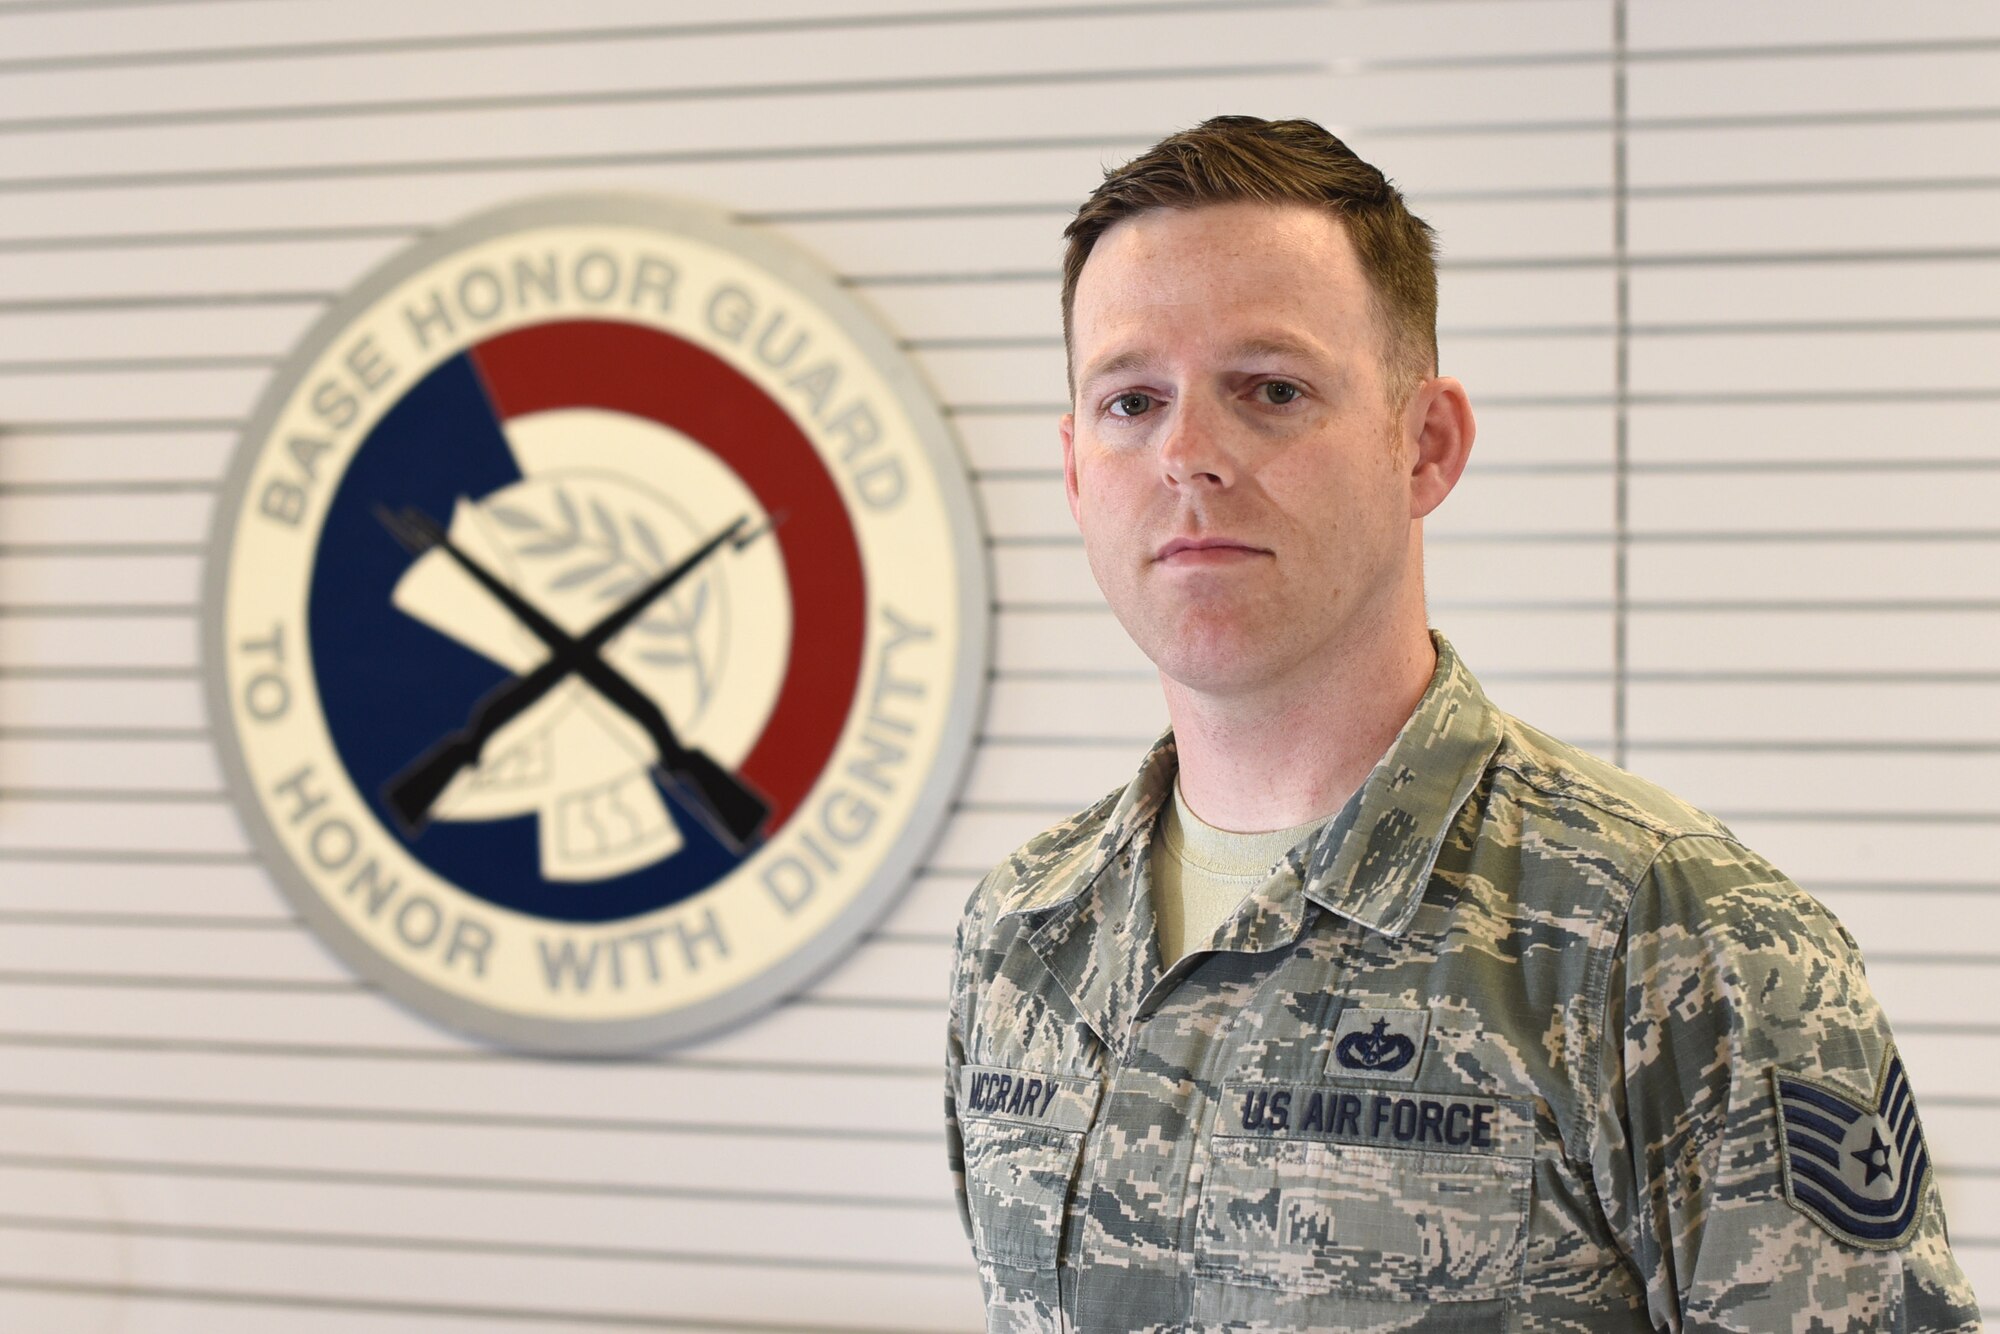 Tech. Sgt. Bobby McCrary, 22nd Force Support Squadron Honor Guard NCO in charge, poses for a photo, May 9, 2016, at McConnell Air Force Base, Kan. McCrary displayed great leadership, community involvement and made significant contributions to the Air Force, which has grabbed Wichita Business Journal’s attention and recognized him as one of their ‘40 Under 40.’ (U.S. Air Force photo/Senior Airman Christopher Thornbury)